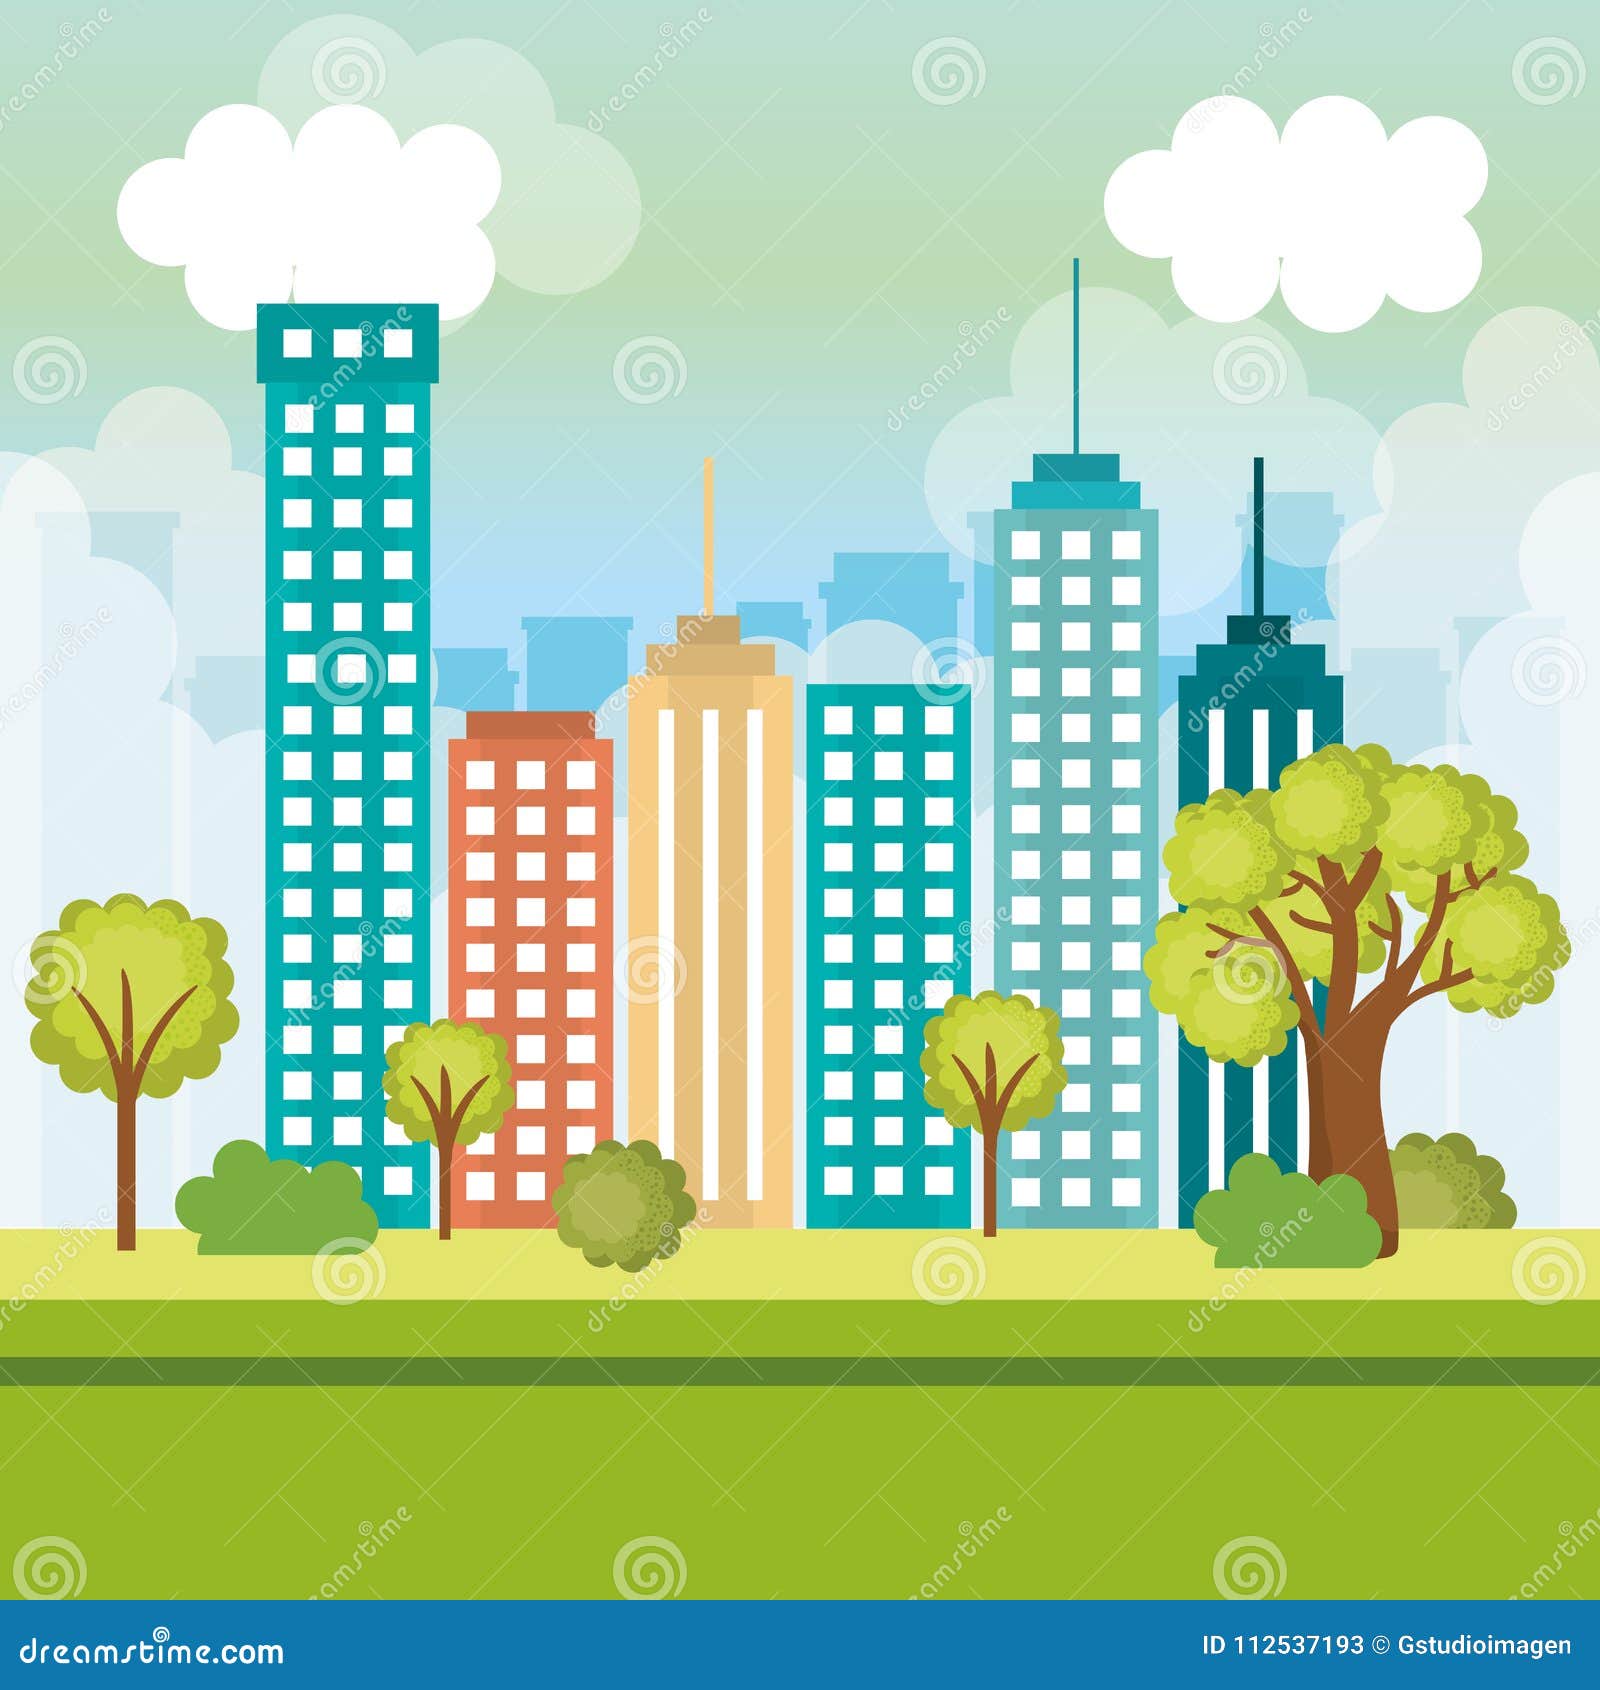 City buildings design stock vector. Illustration of town - 112537193